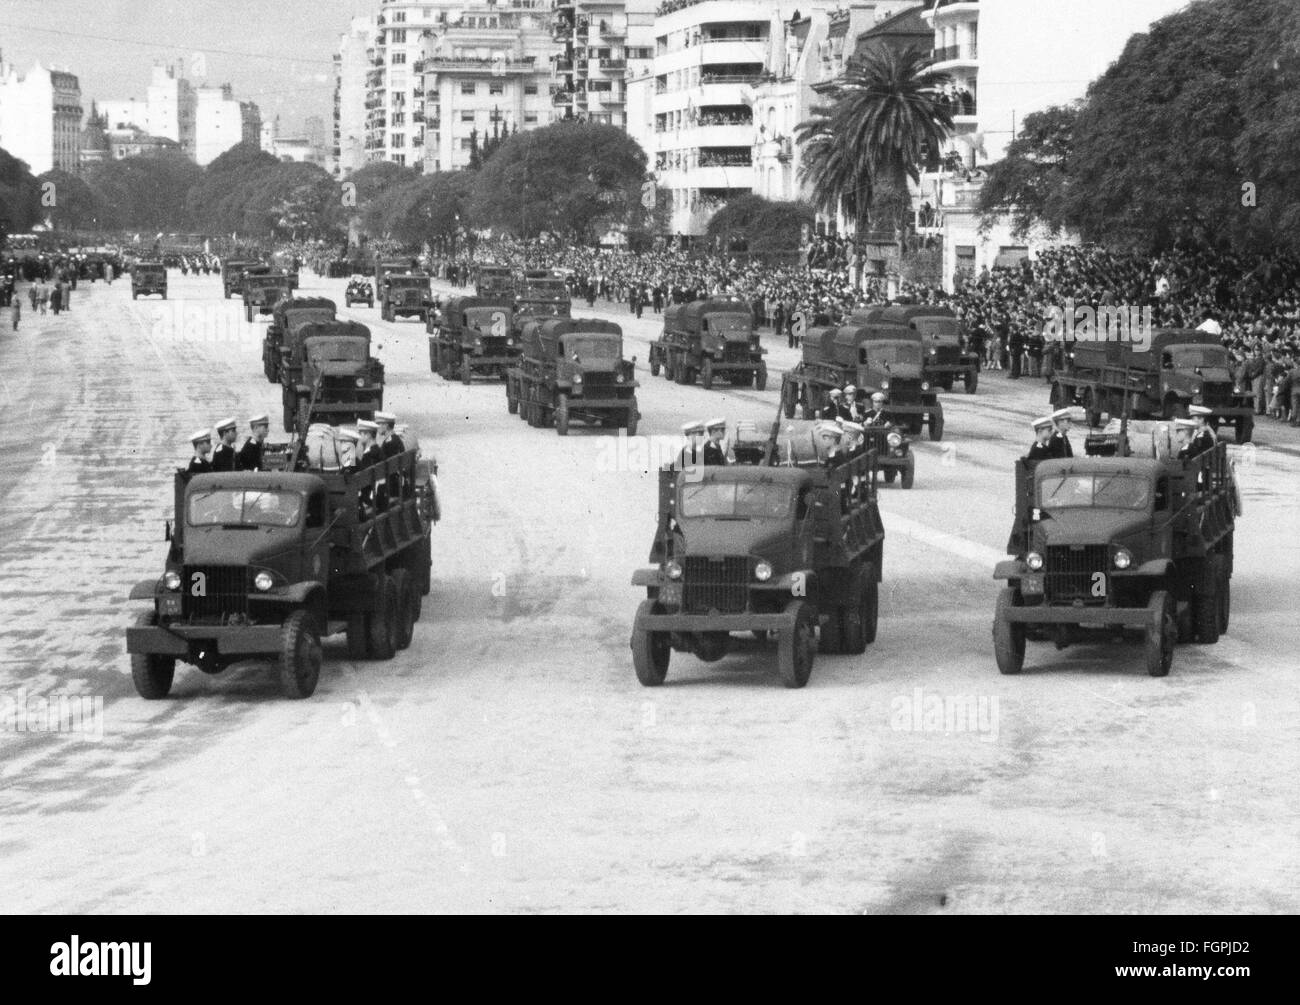 military, Argentina, army, parade at Independence Day, Buenos Aires, 9.7.1957, Additional-Rights-Clearences-Not Available Stock Photo